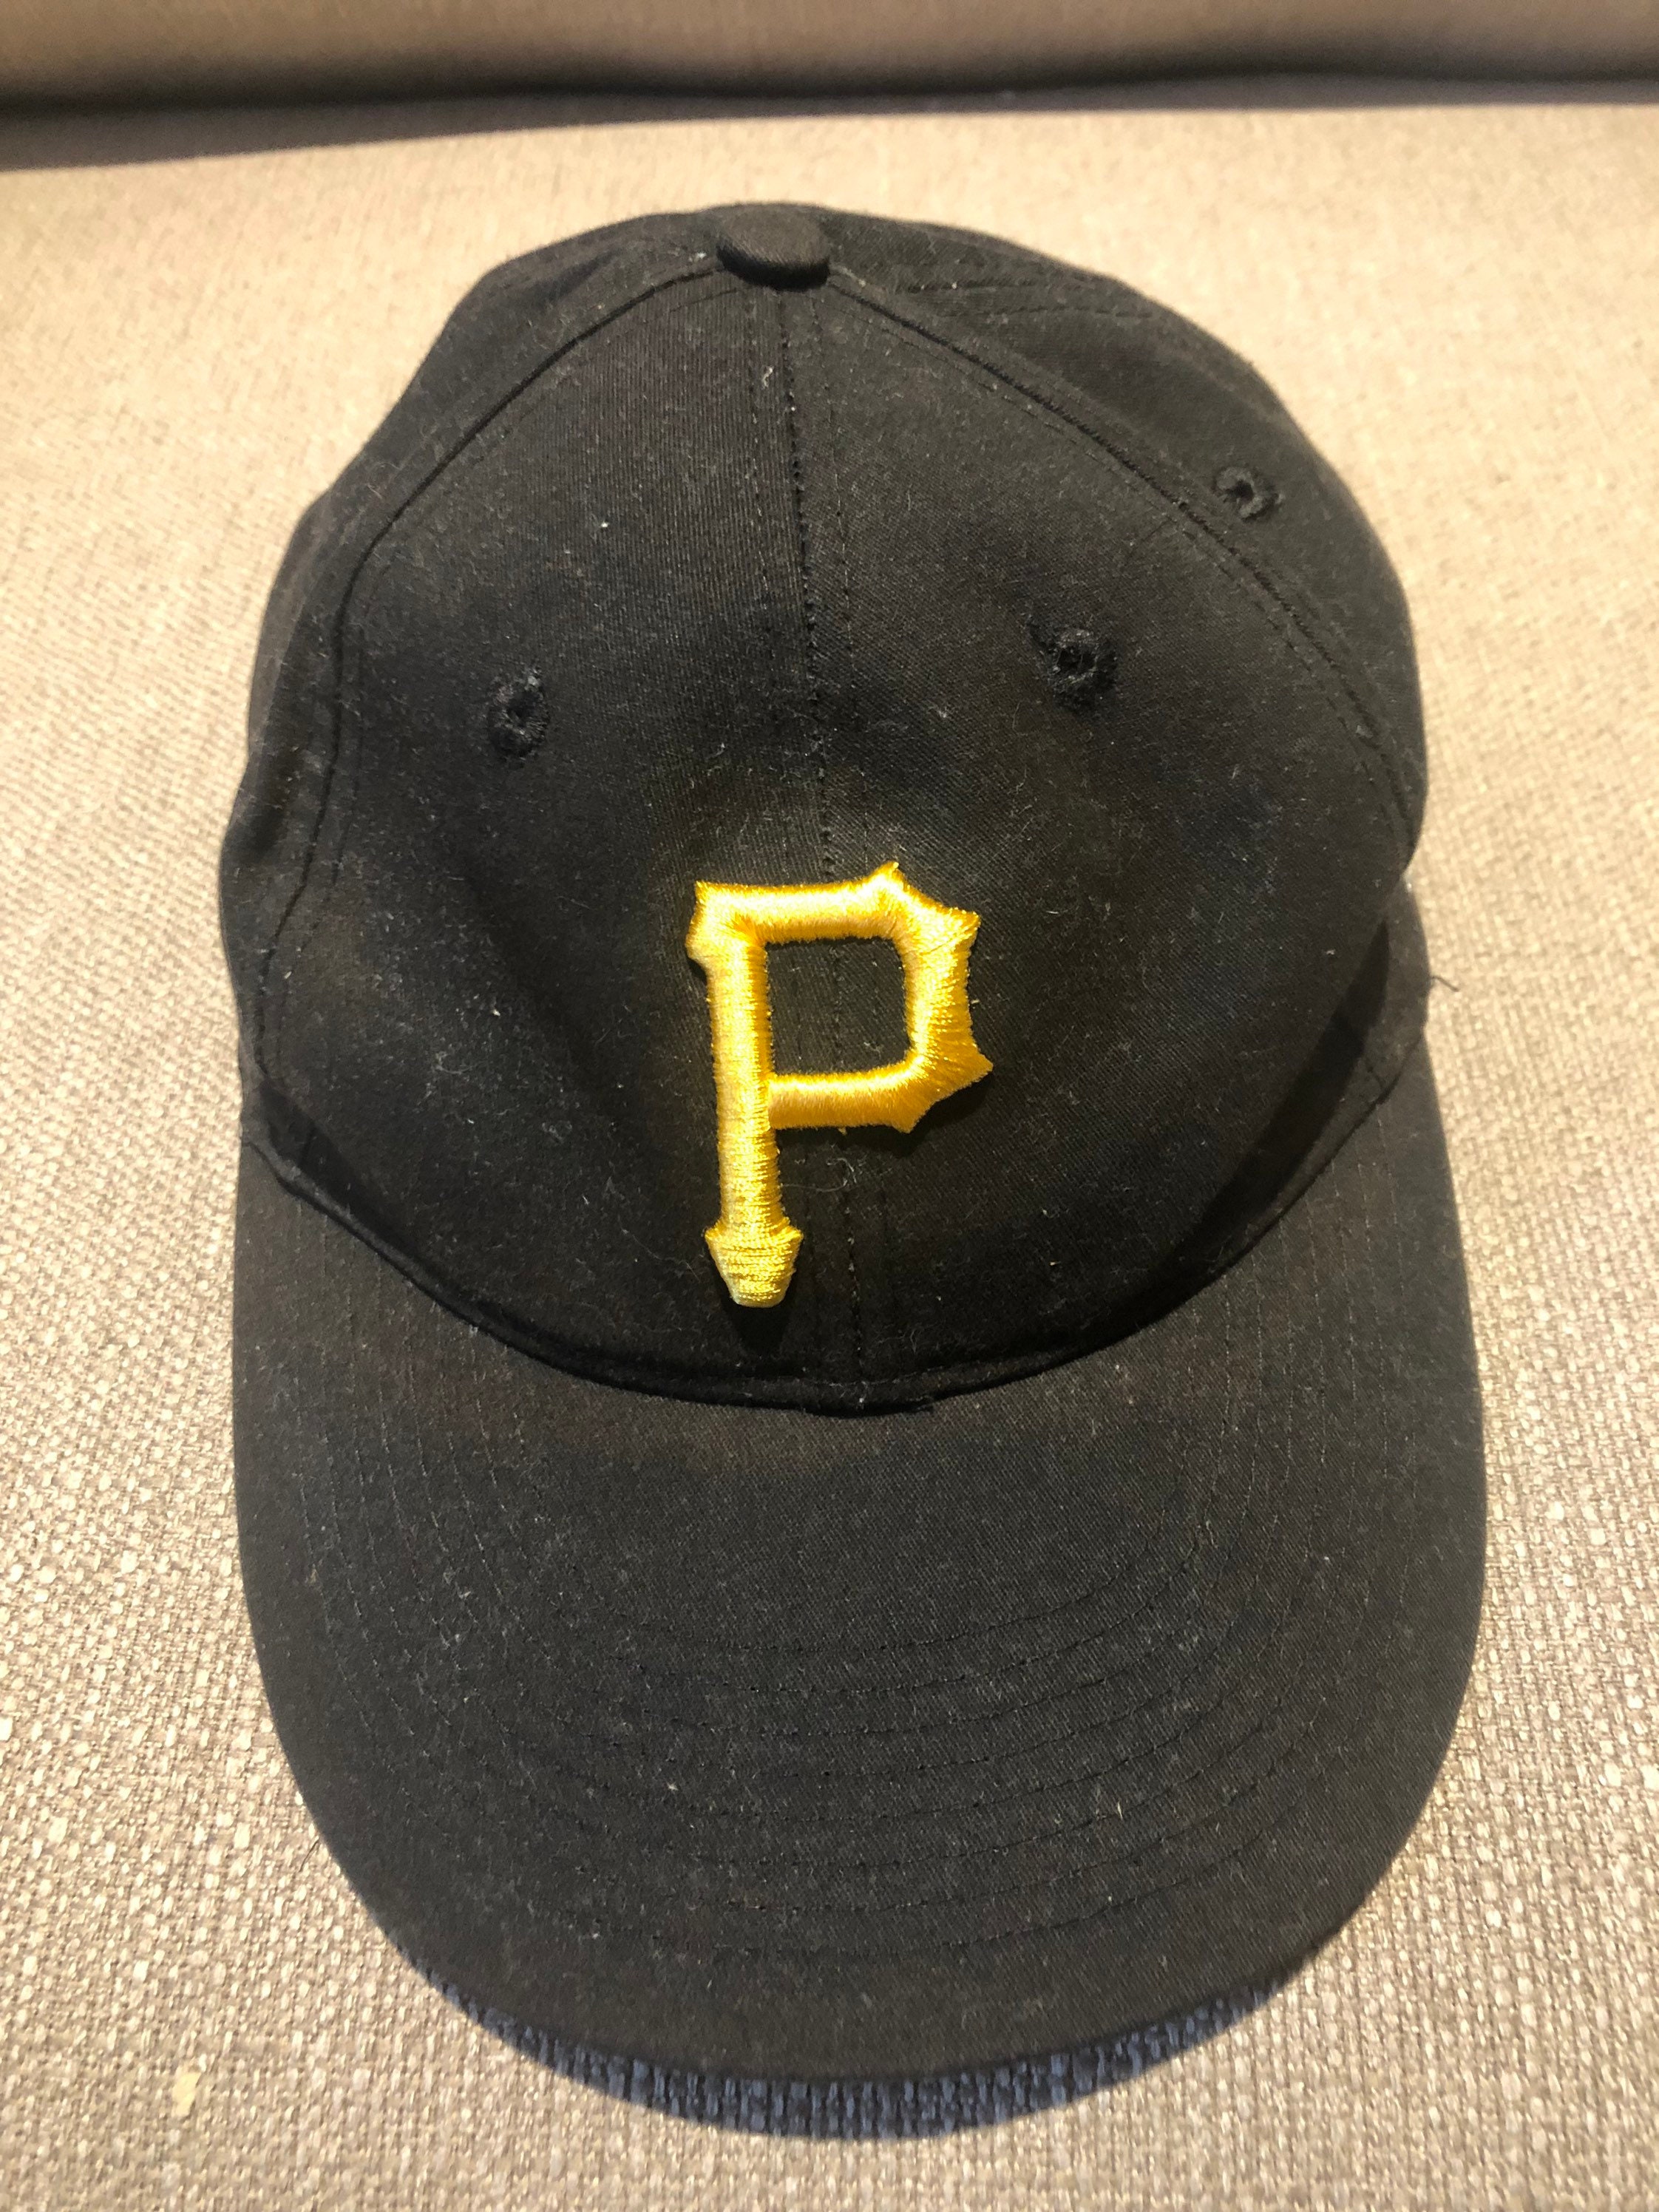 Deadstock Vintage 1970s Pittsburgh Pirates Pill Hat 